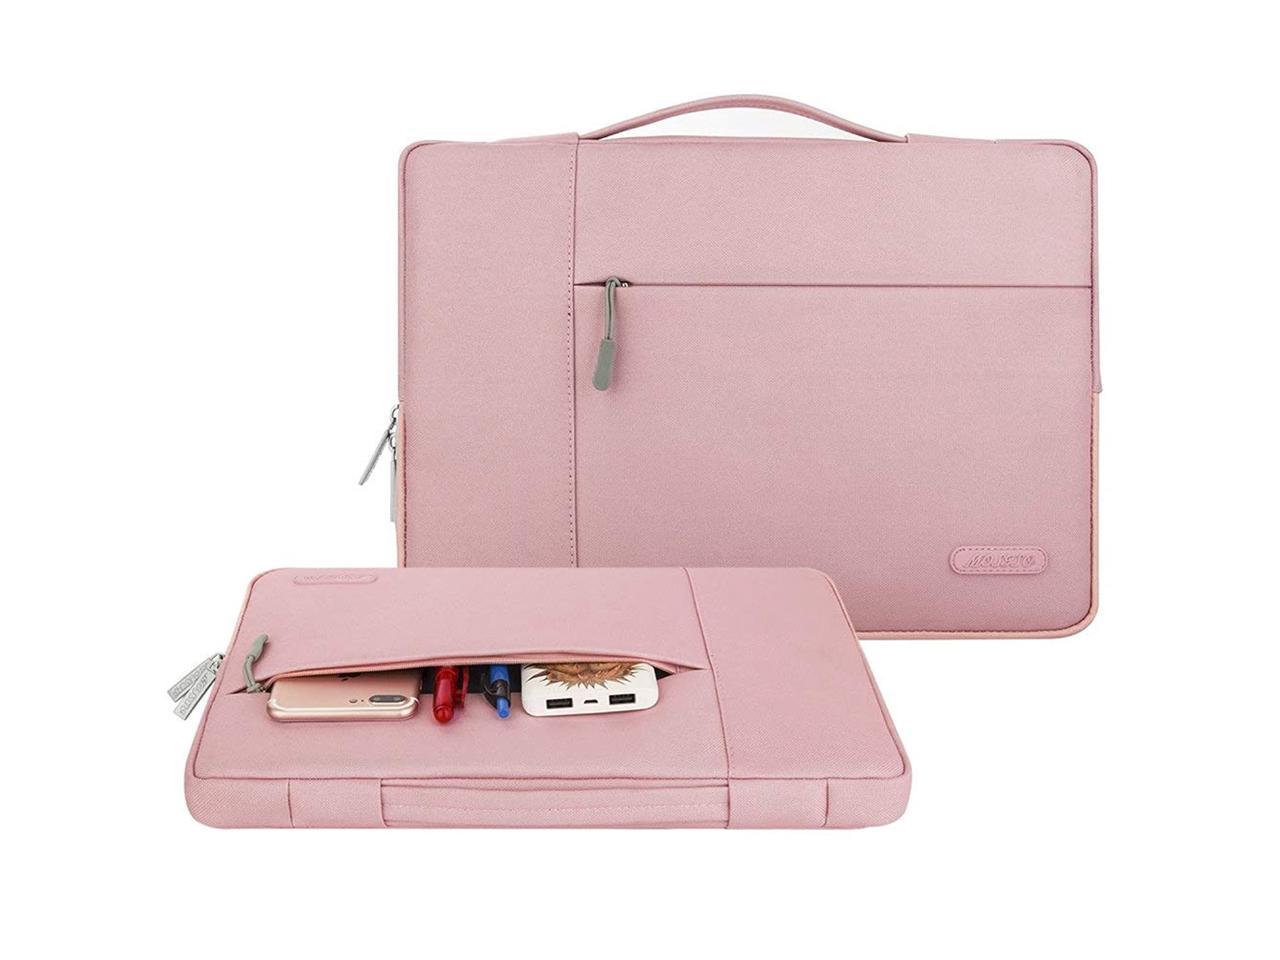 MOSISO Laptop Sleeve Compatible with 13-13.3 inch MacBook Air, MacBook ...